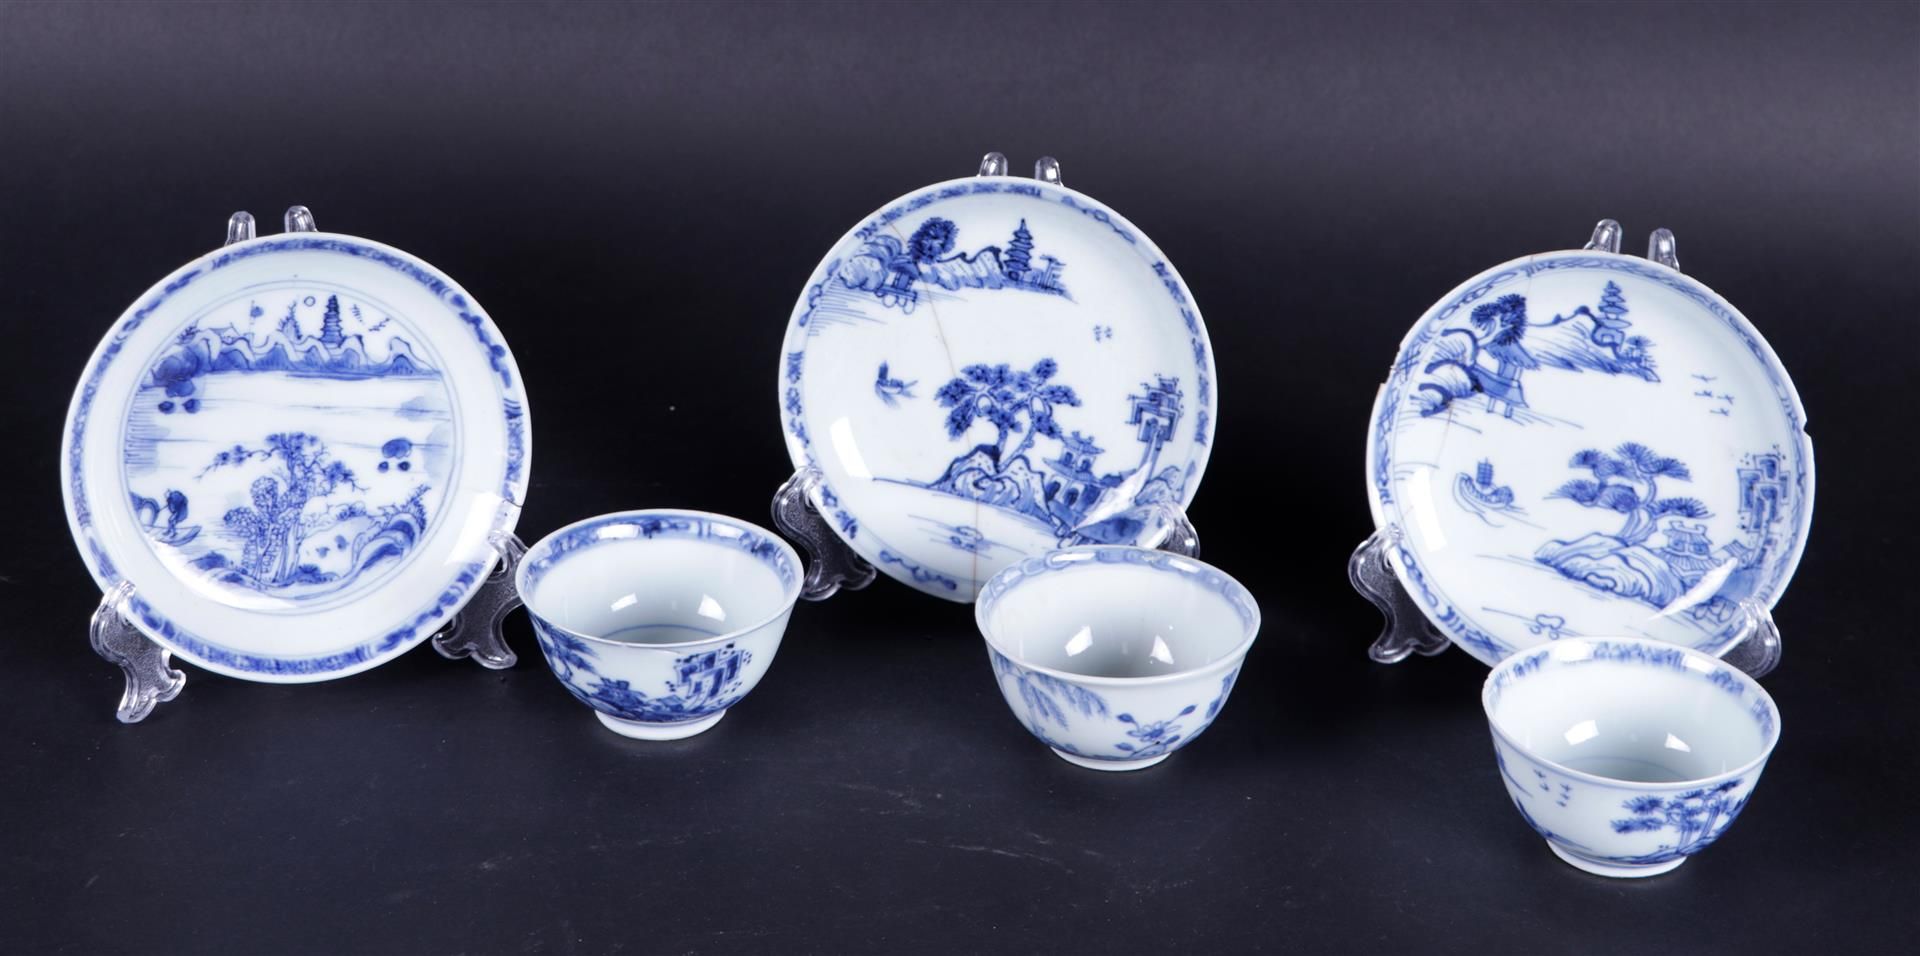 A set of (3) Porcelain cups and saucers blue-white with figures in river landscape, China, 18th cent